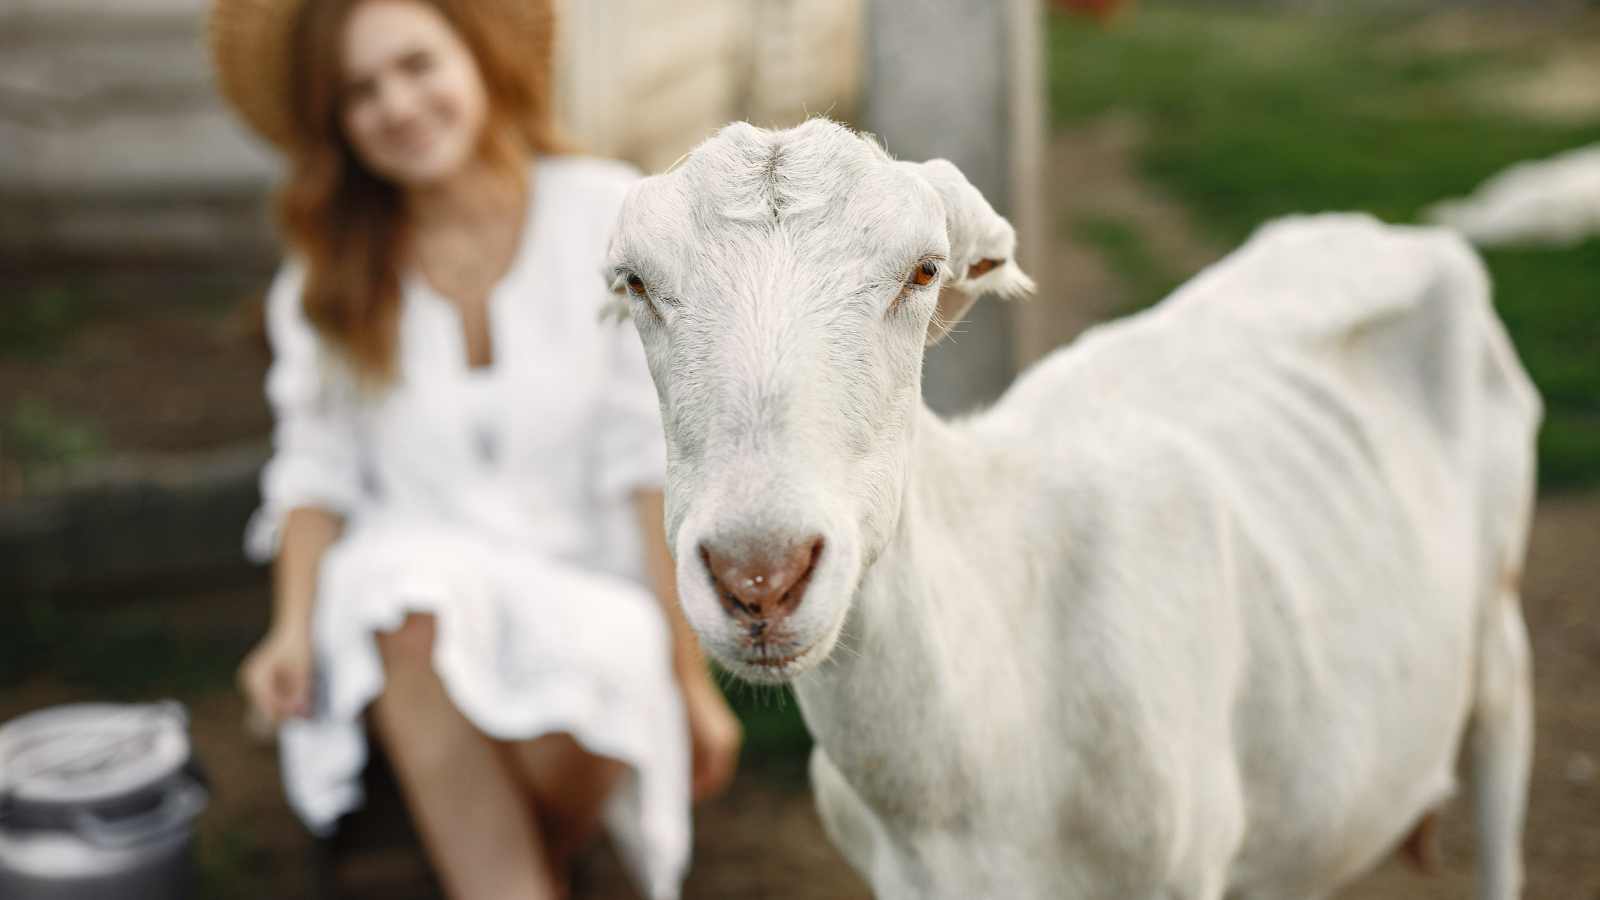 A white milk goat looks at the camera. A blurry dark-haired woman in a white dress is sitting and smiling in the background.